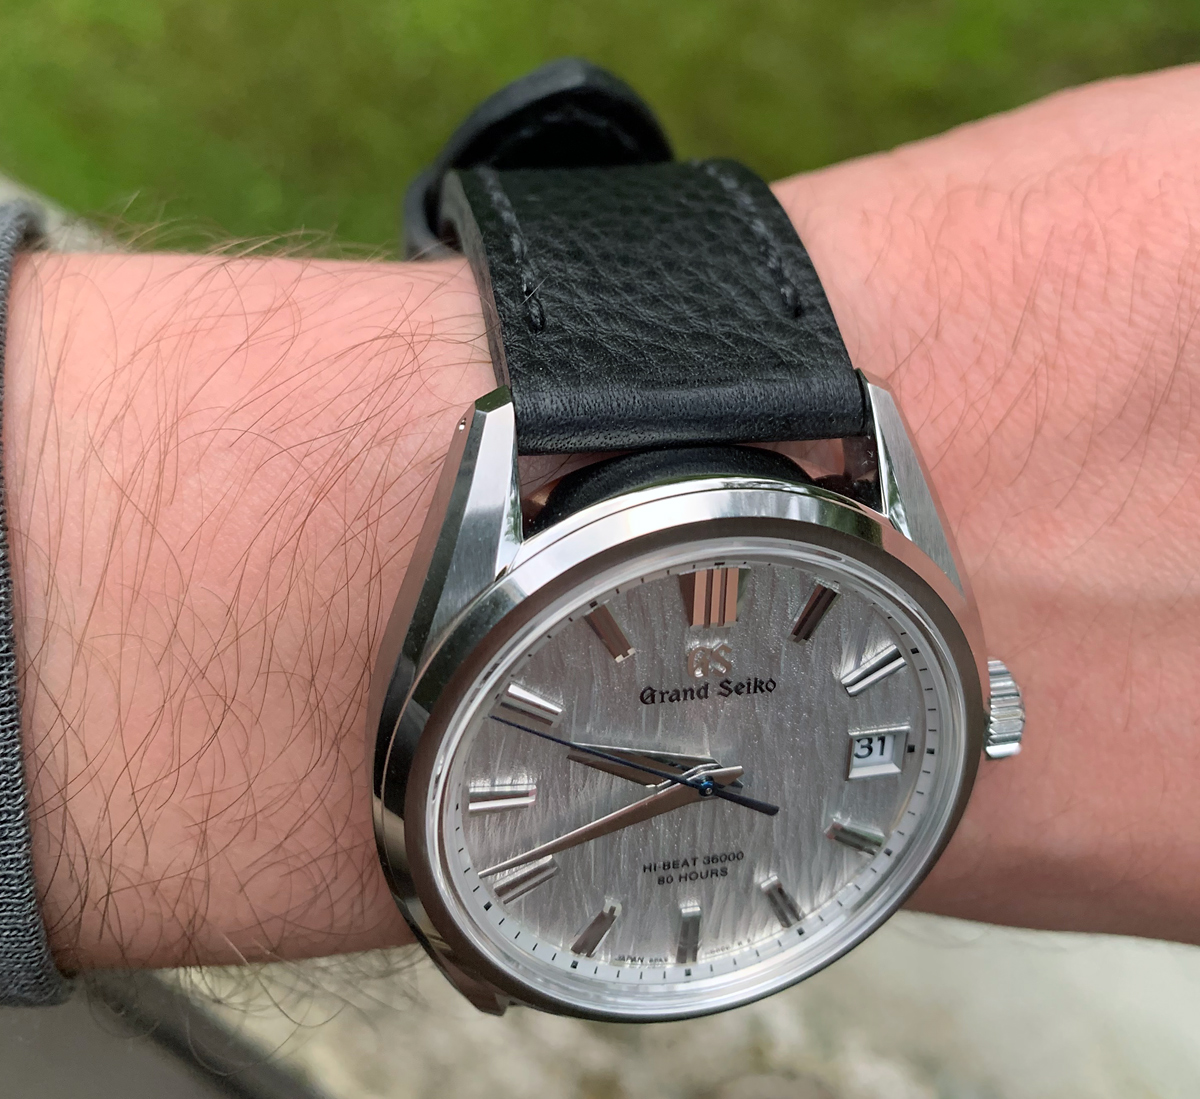 Grand Seiko SLGH005 on Raven leather with black stitching. © Janne Suominen